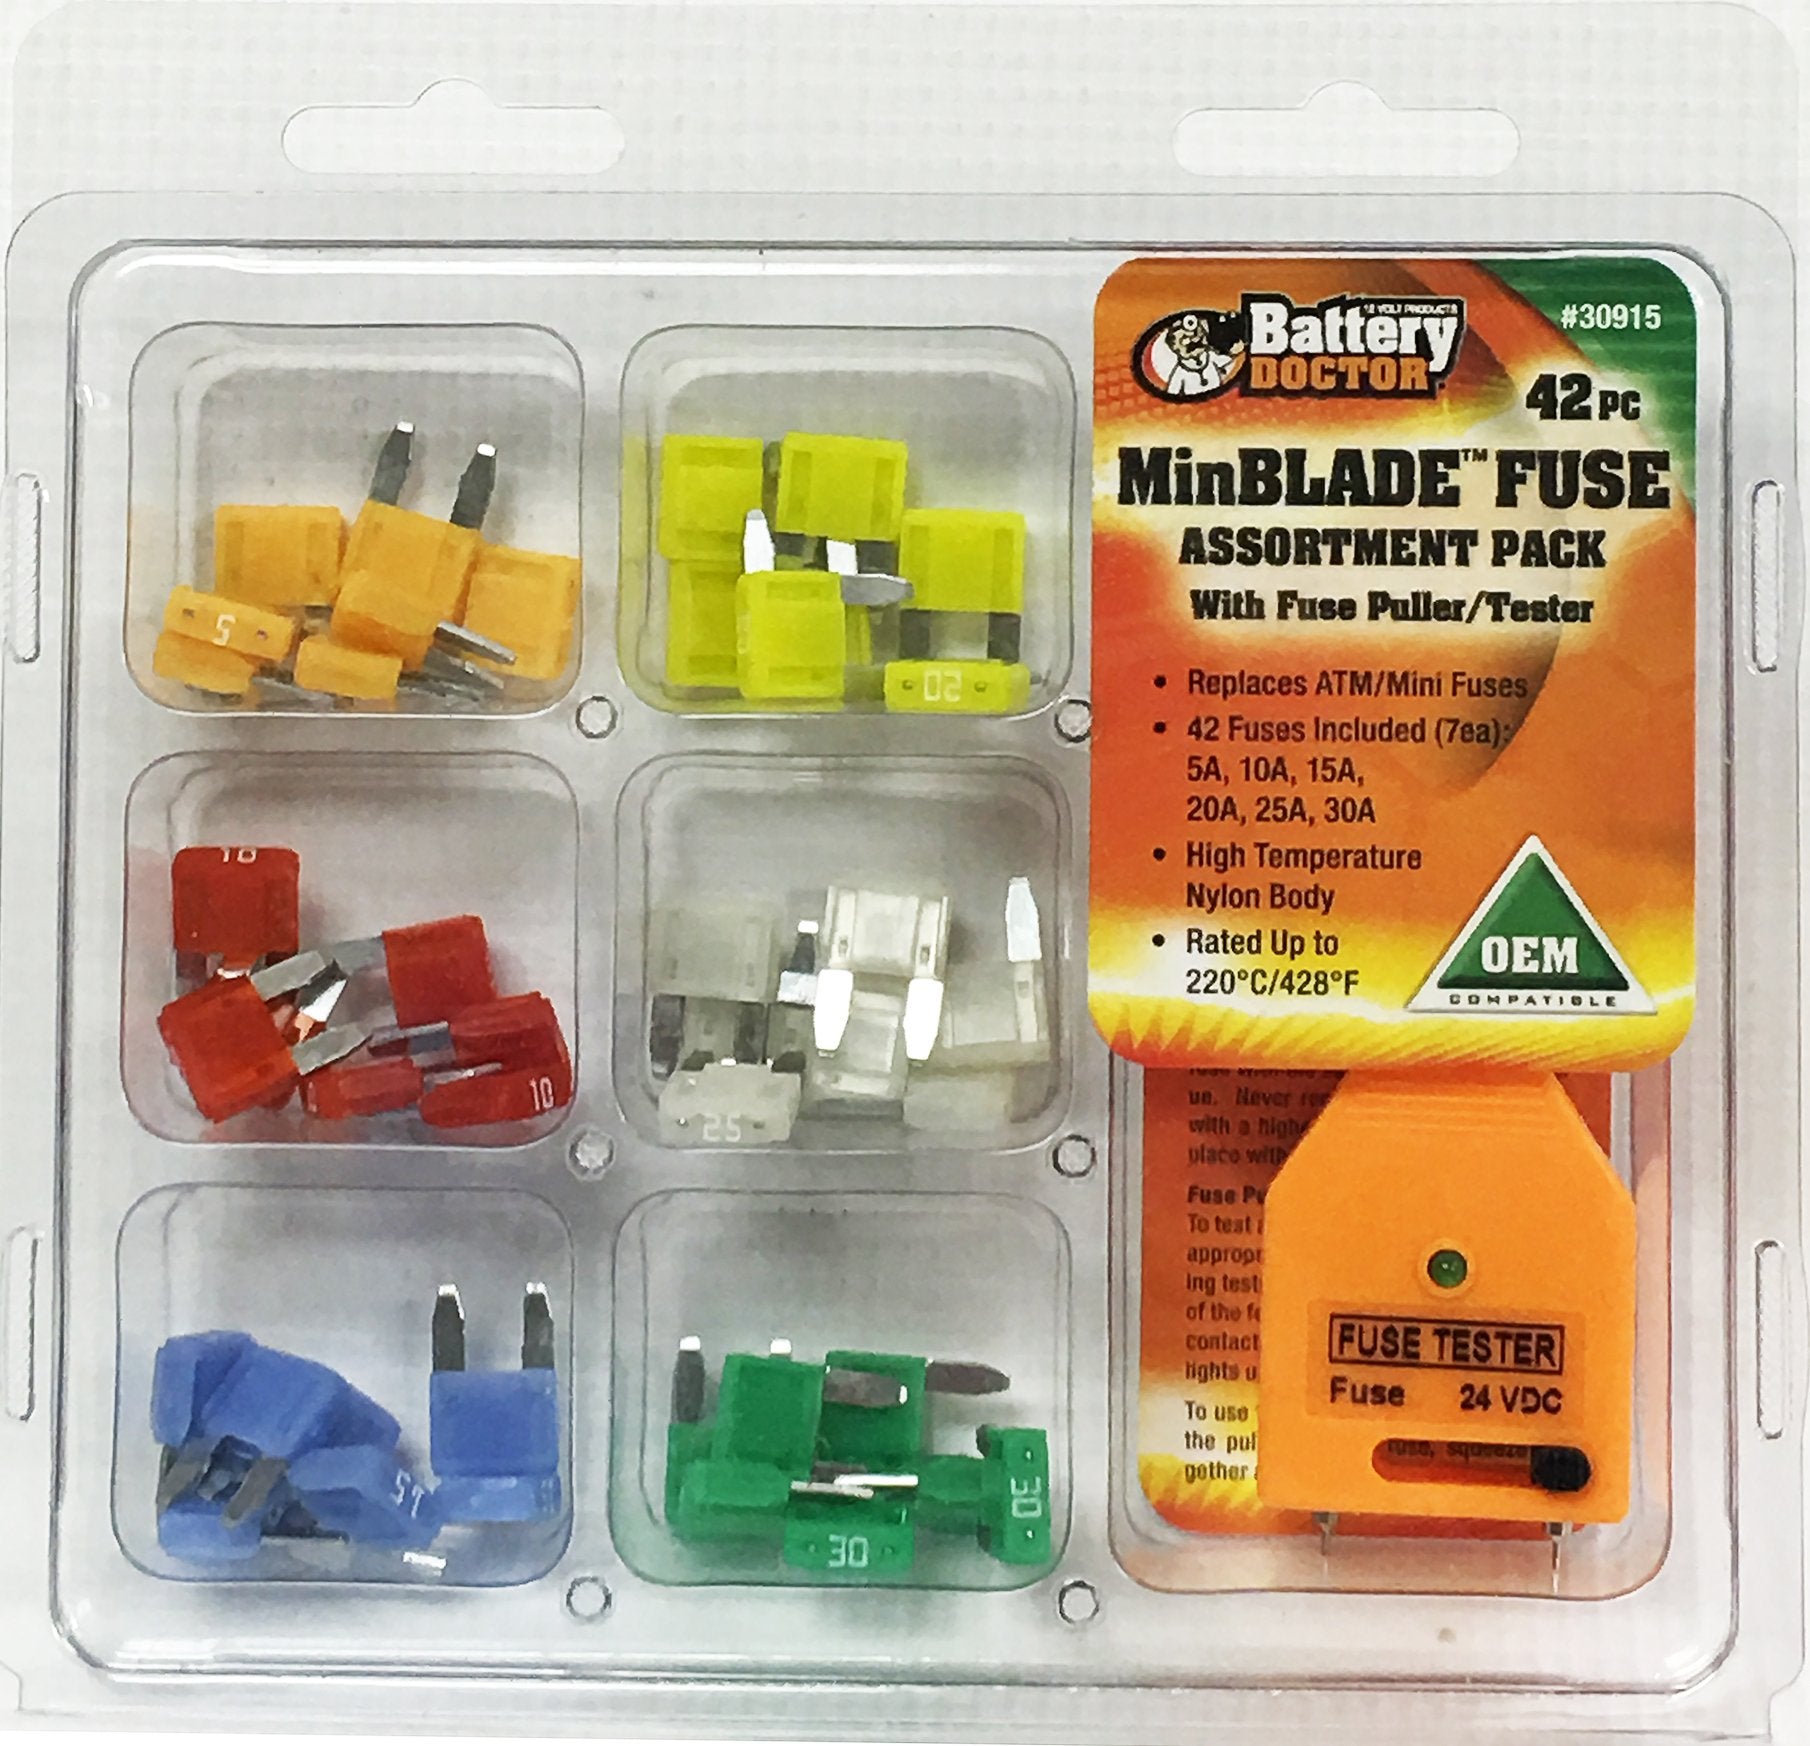 WirthCo 30915 Battery Doctor Minblade Fuse Kit with Puller and Tester, 42 Piece